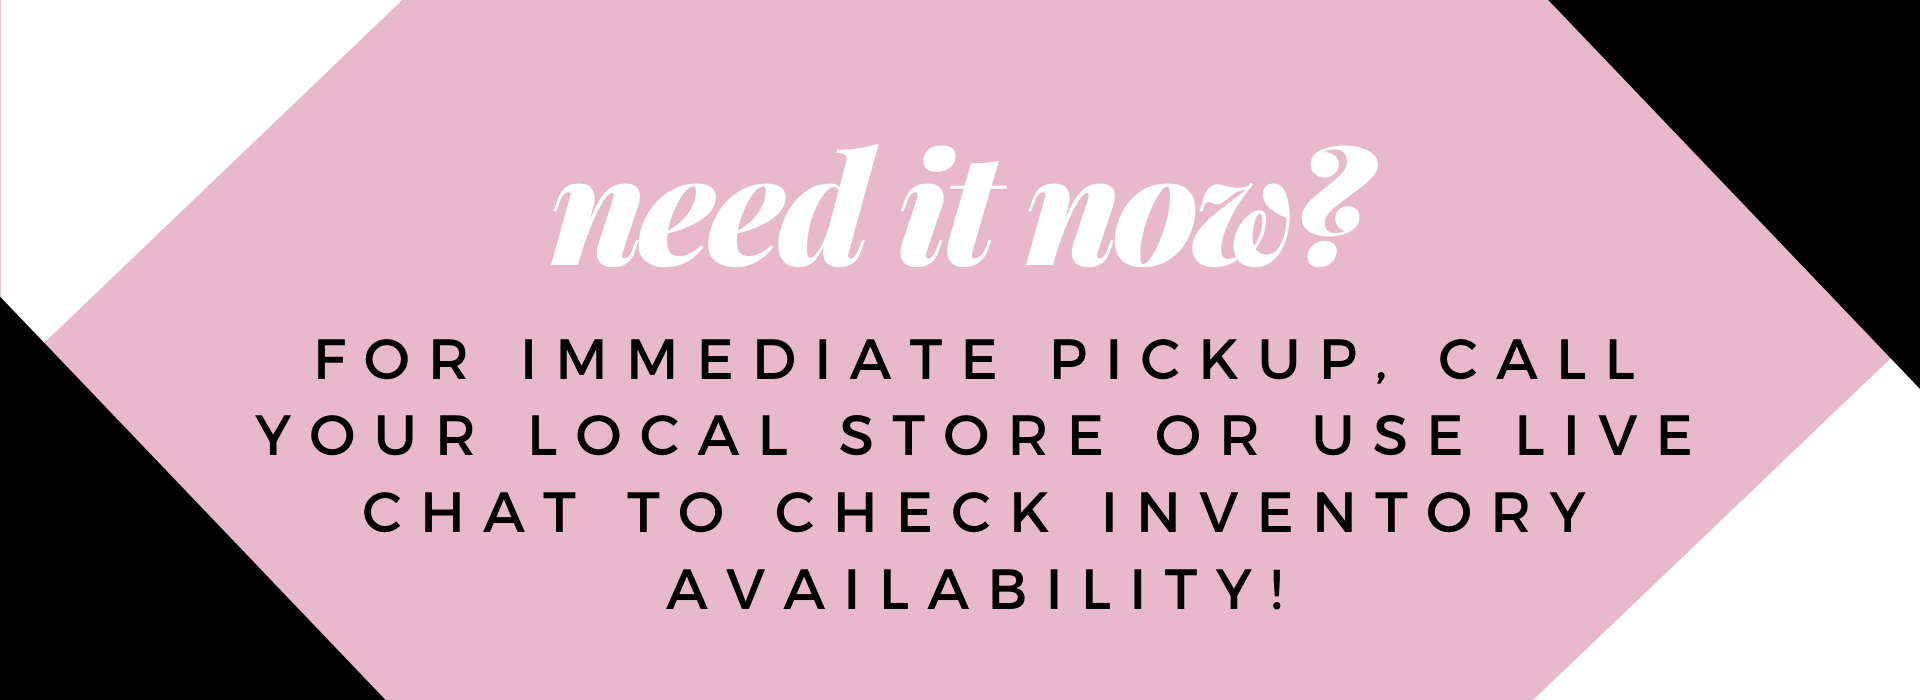 need it now? for immediat pickup, call your local store or use live chat to check inventory availability